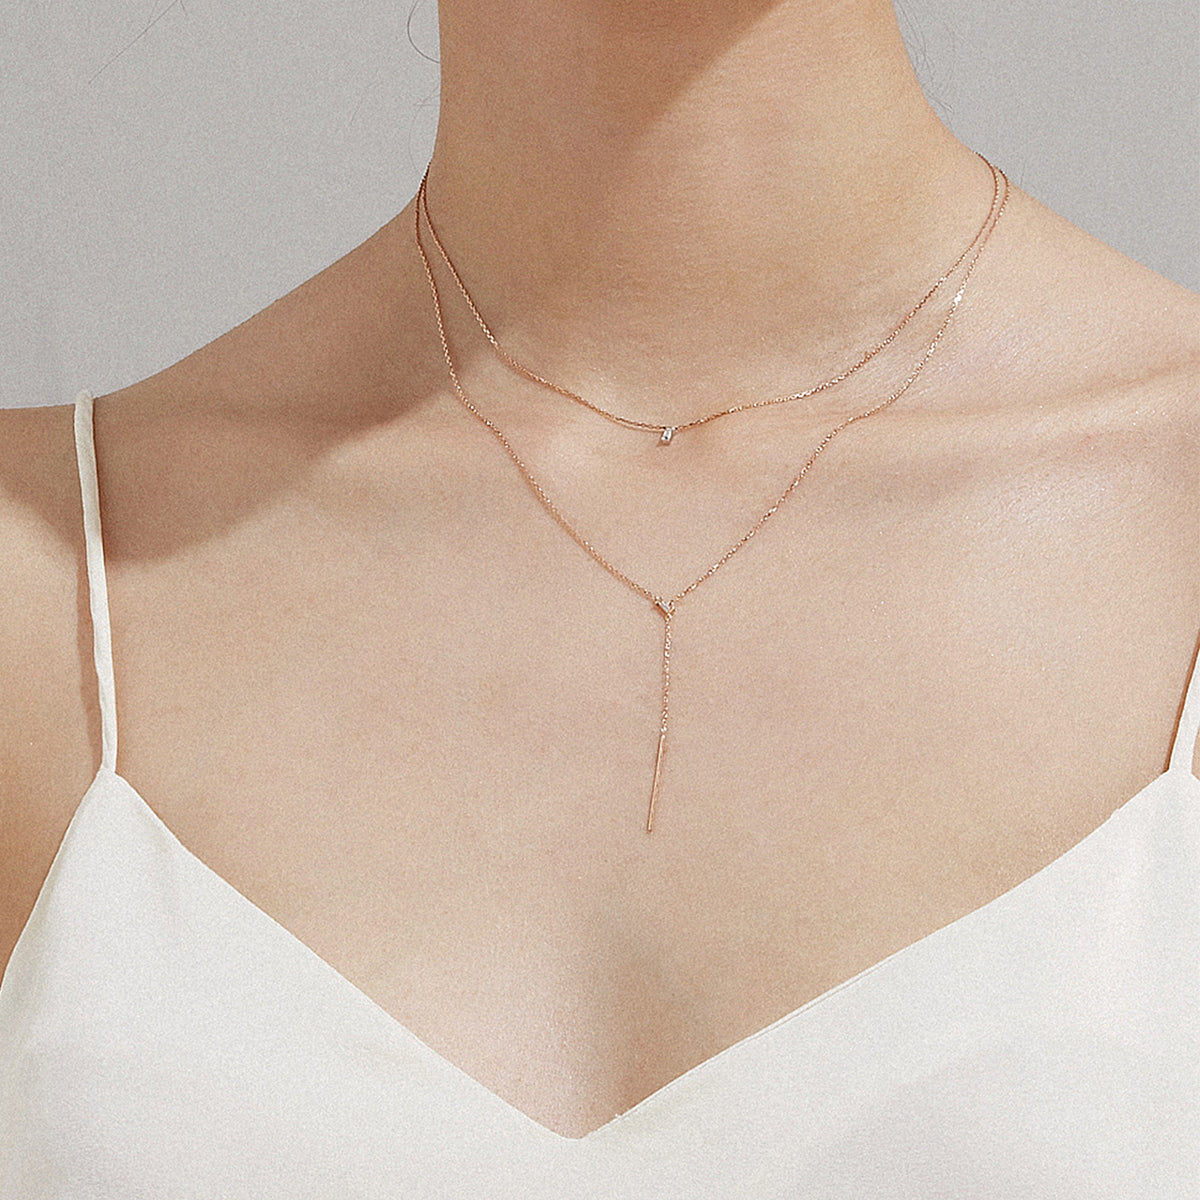 Heroine Collection - 18K Gold Diamond Y-Chain Necklace (Rose Gold)